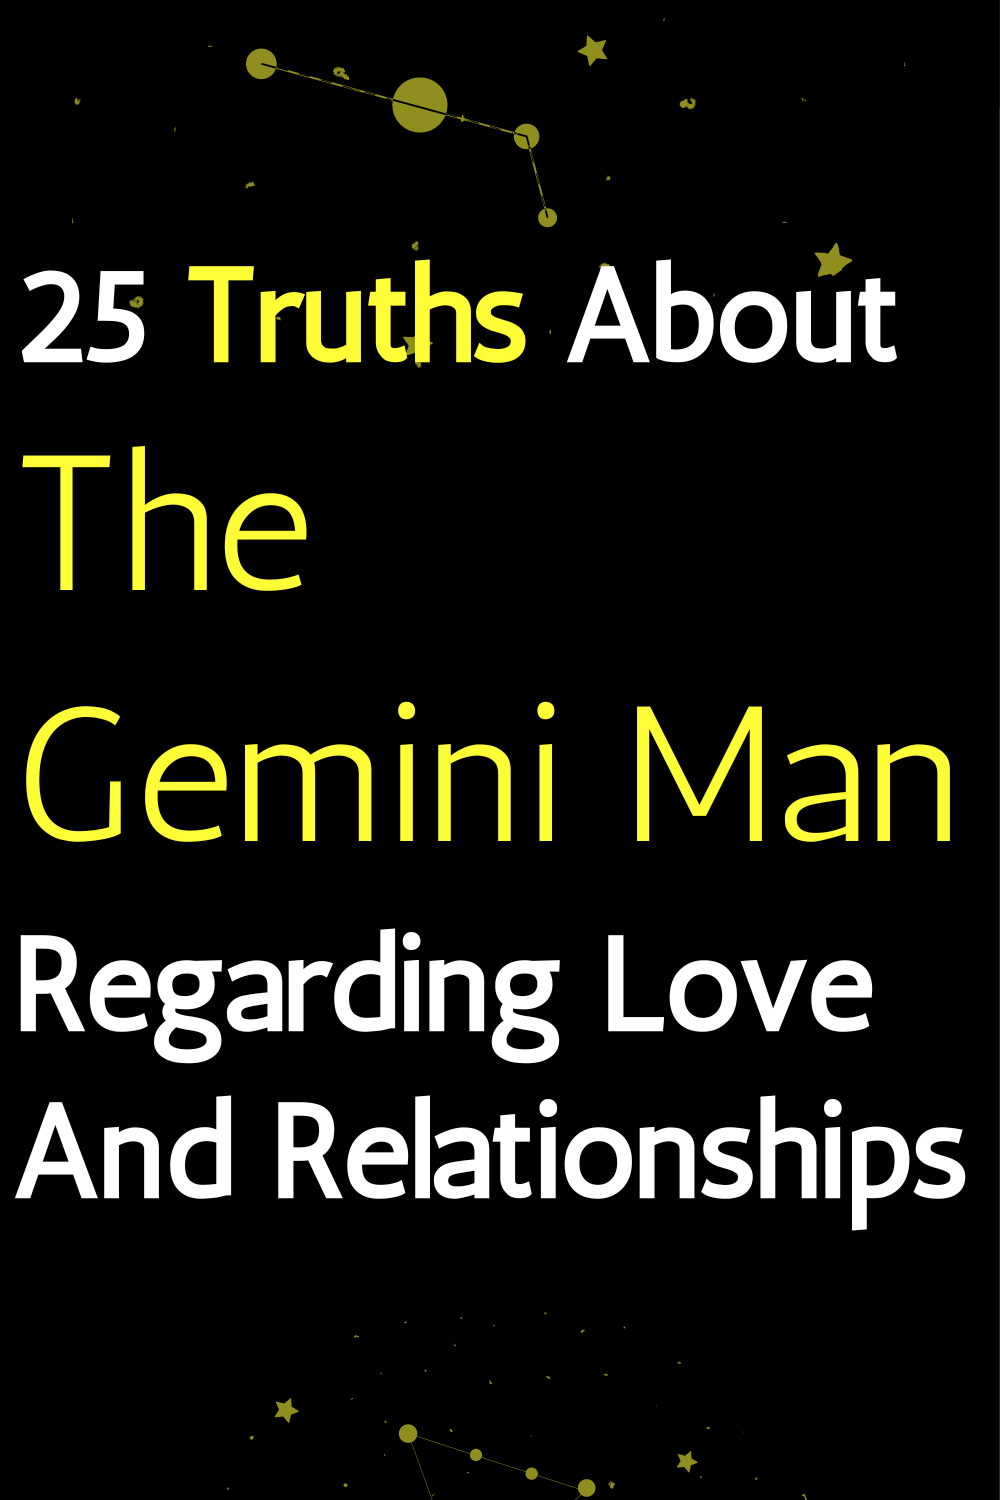 25 Truths About The Gemini Man Regarding Love And Relationships